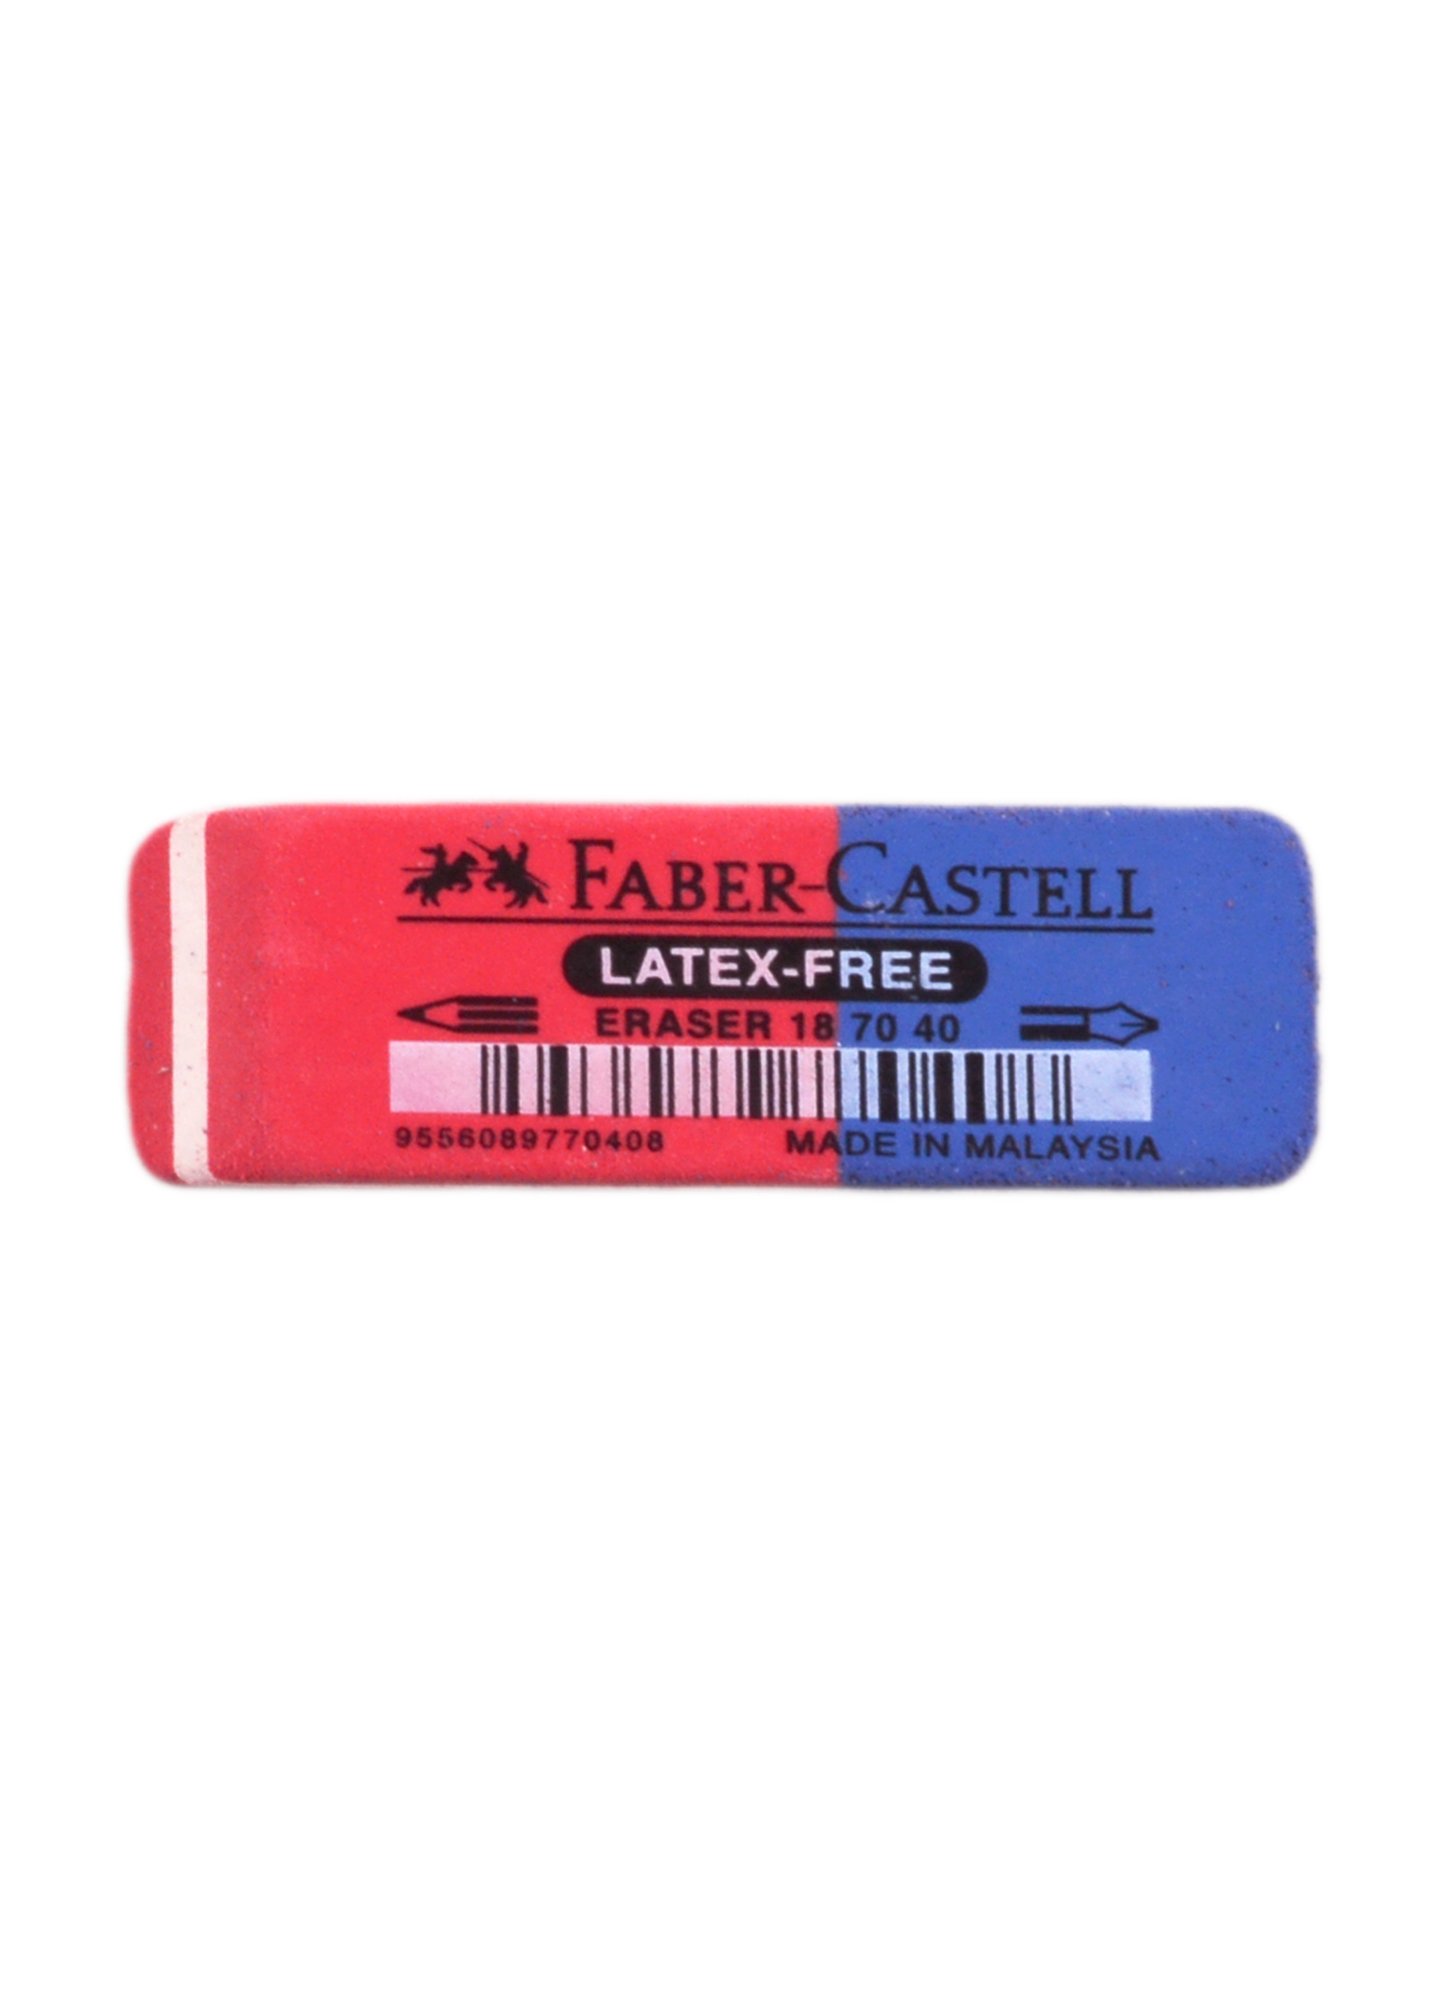  FABER-CASTELL 7070  . 50188   //./